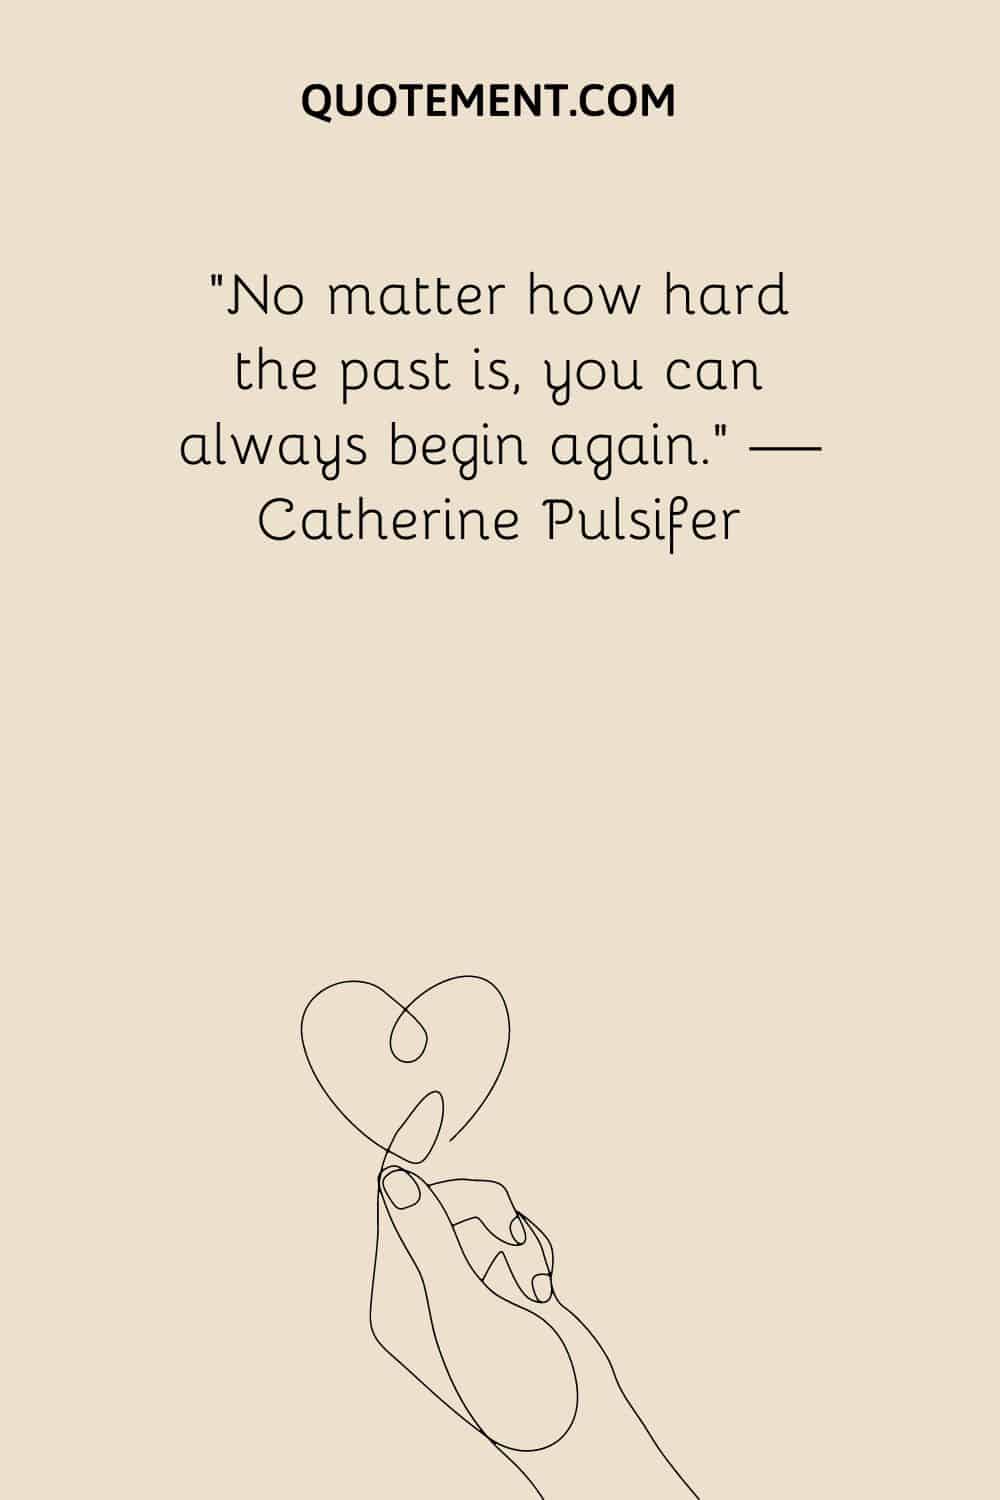 No matter how hard the past is, you can always begin again